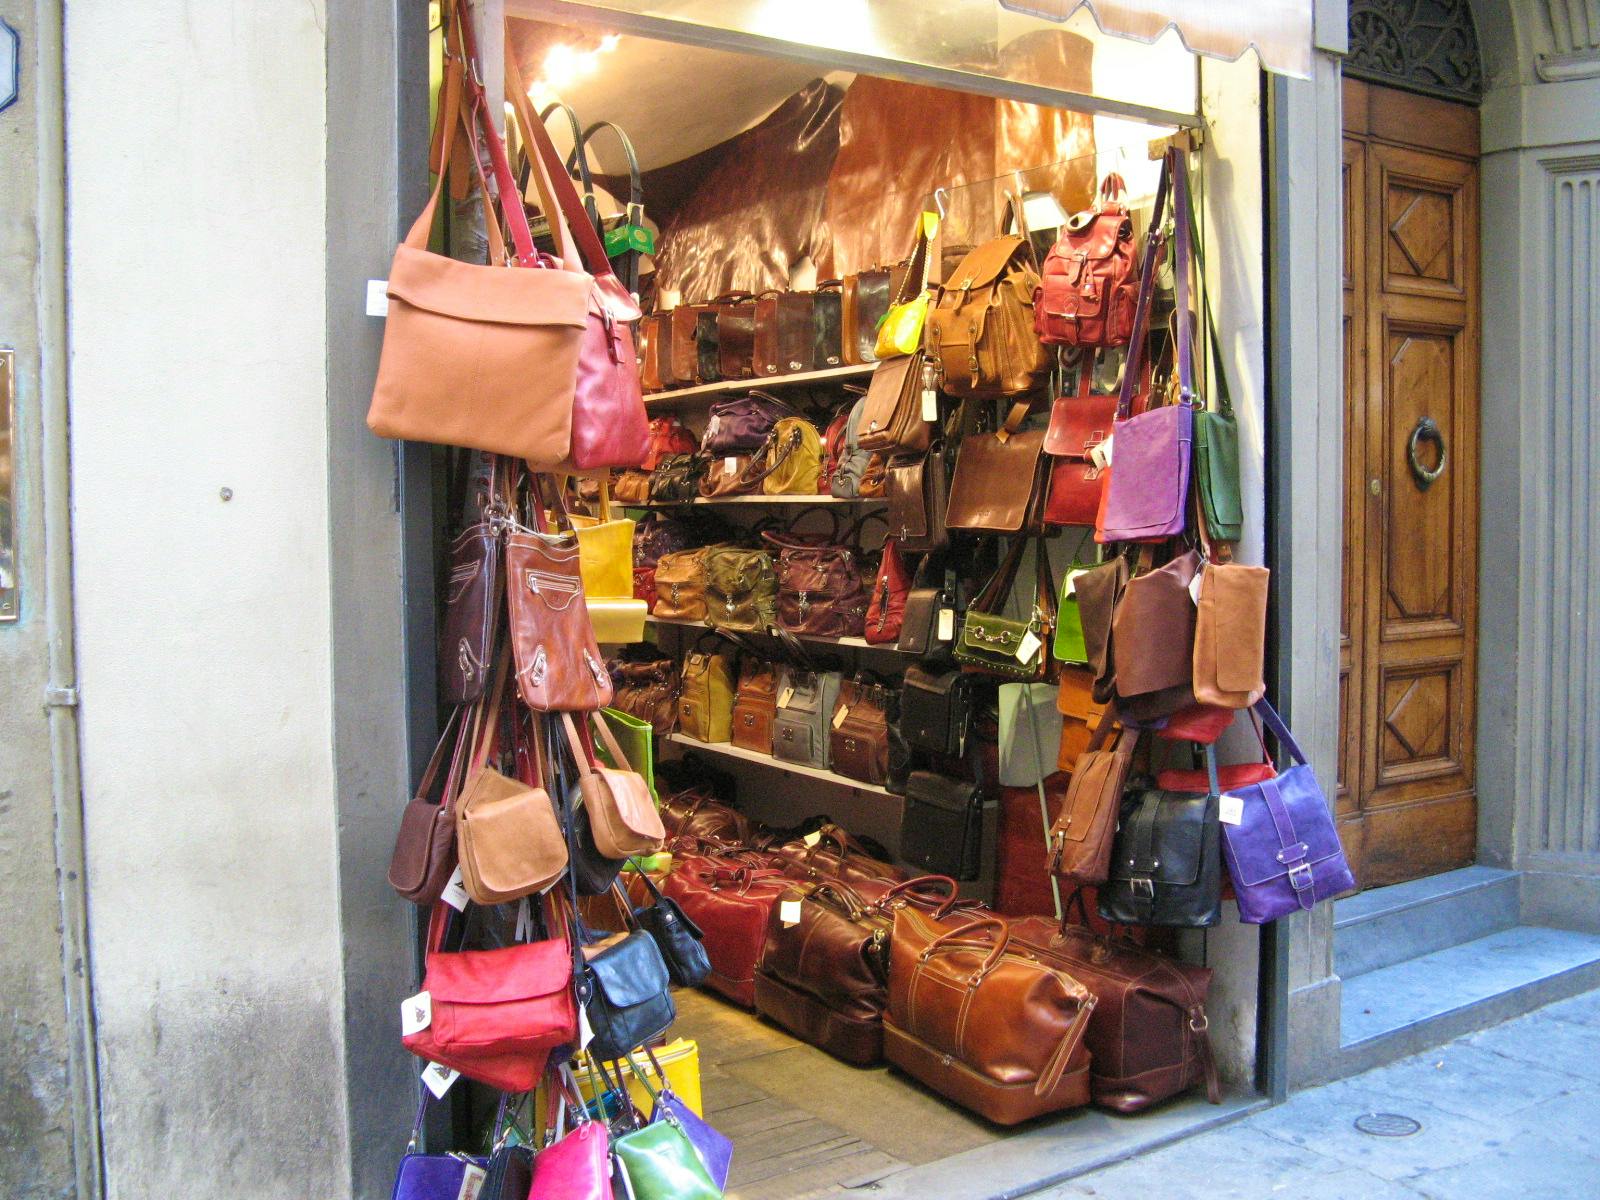 FIND THE BEST LEATHER SHOPS IN ROME ON THIS STREET!